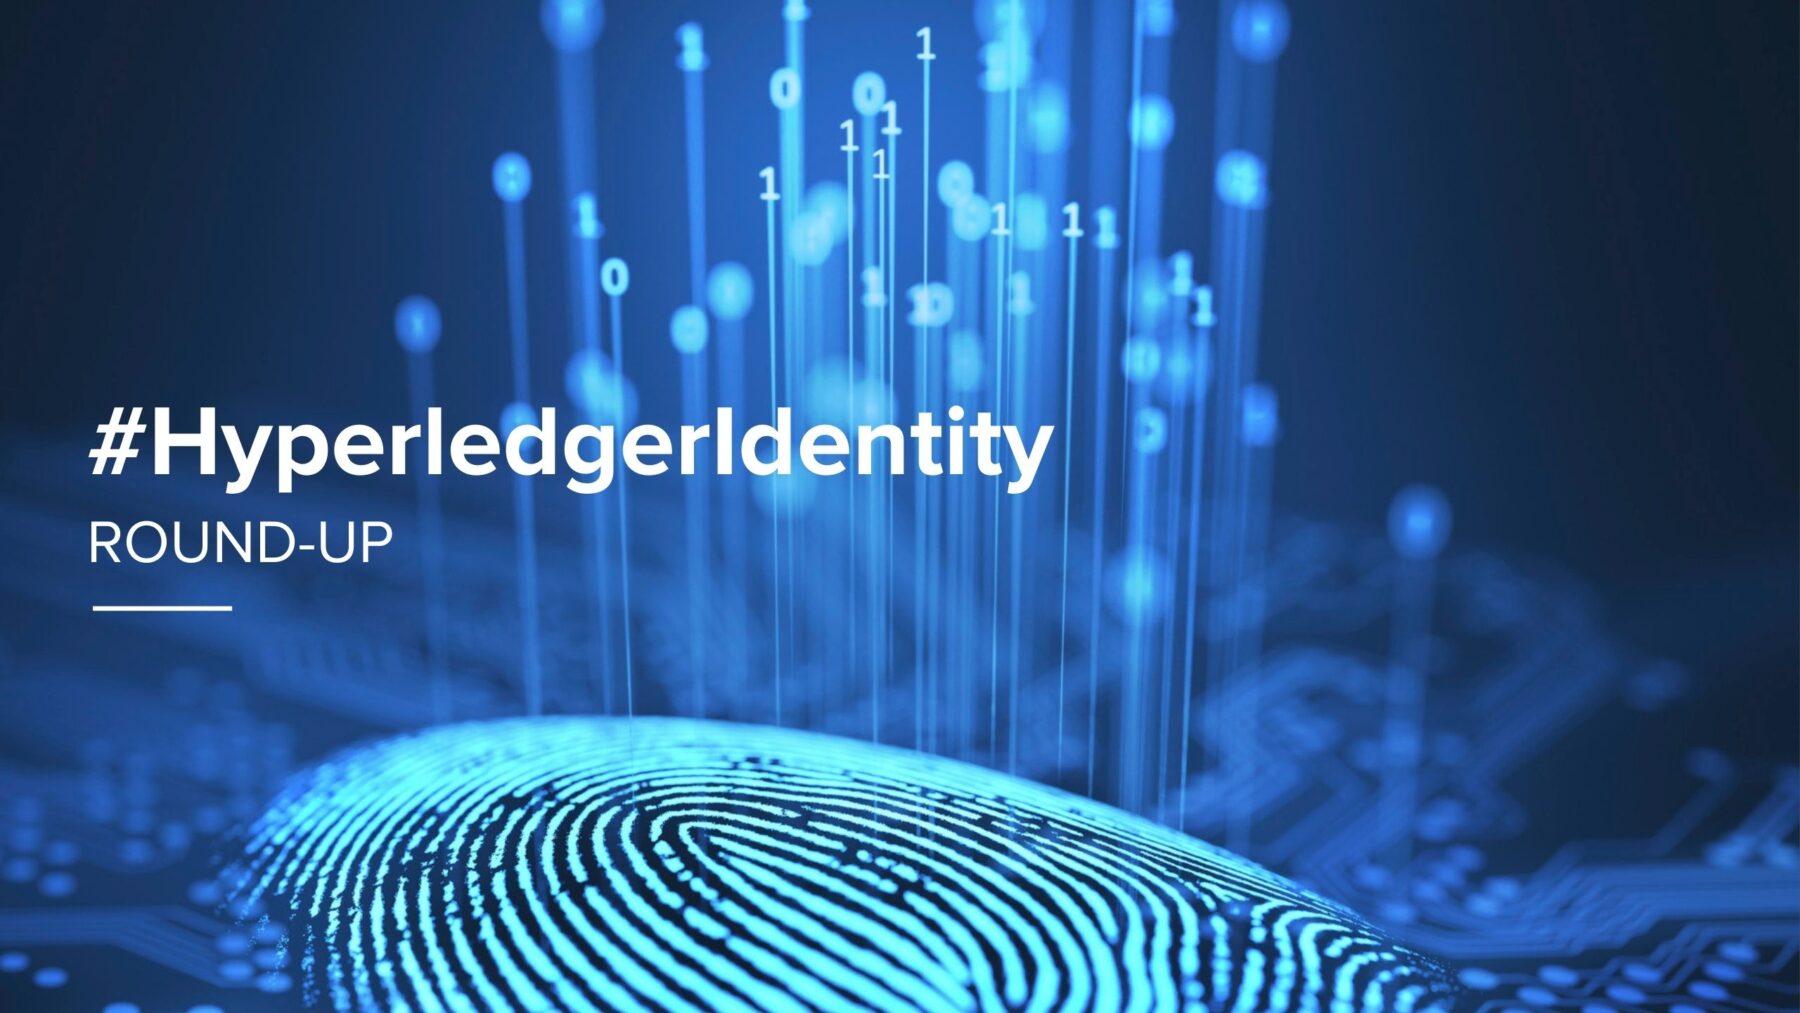 #HyperledgerIdentity round-up: A cross section of production digital identity solutions built using Hyperledger technologies